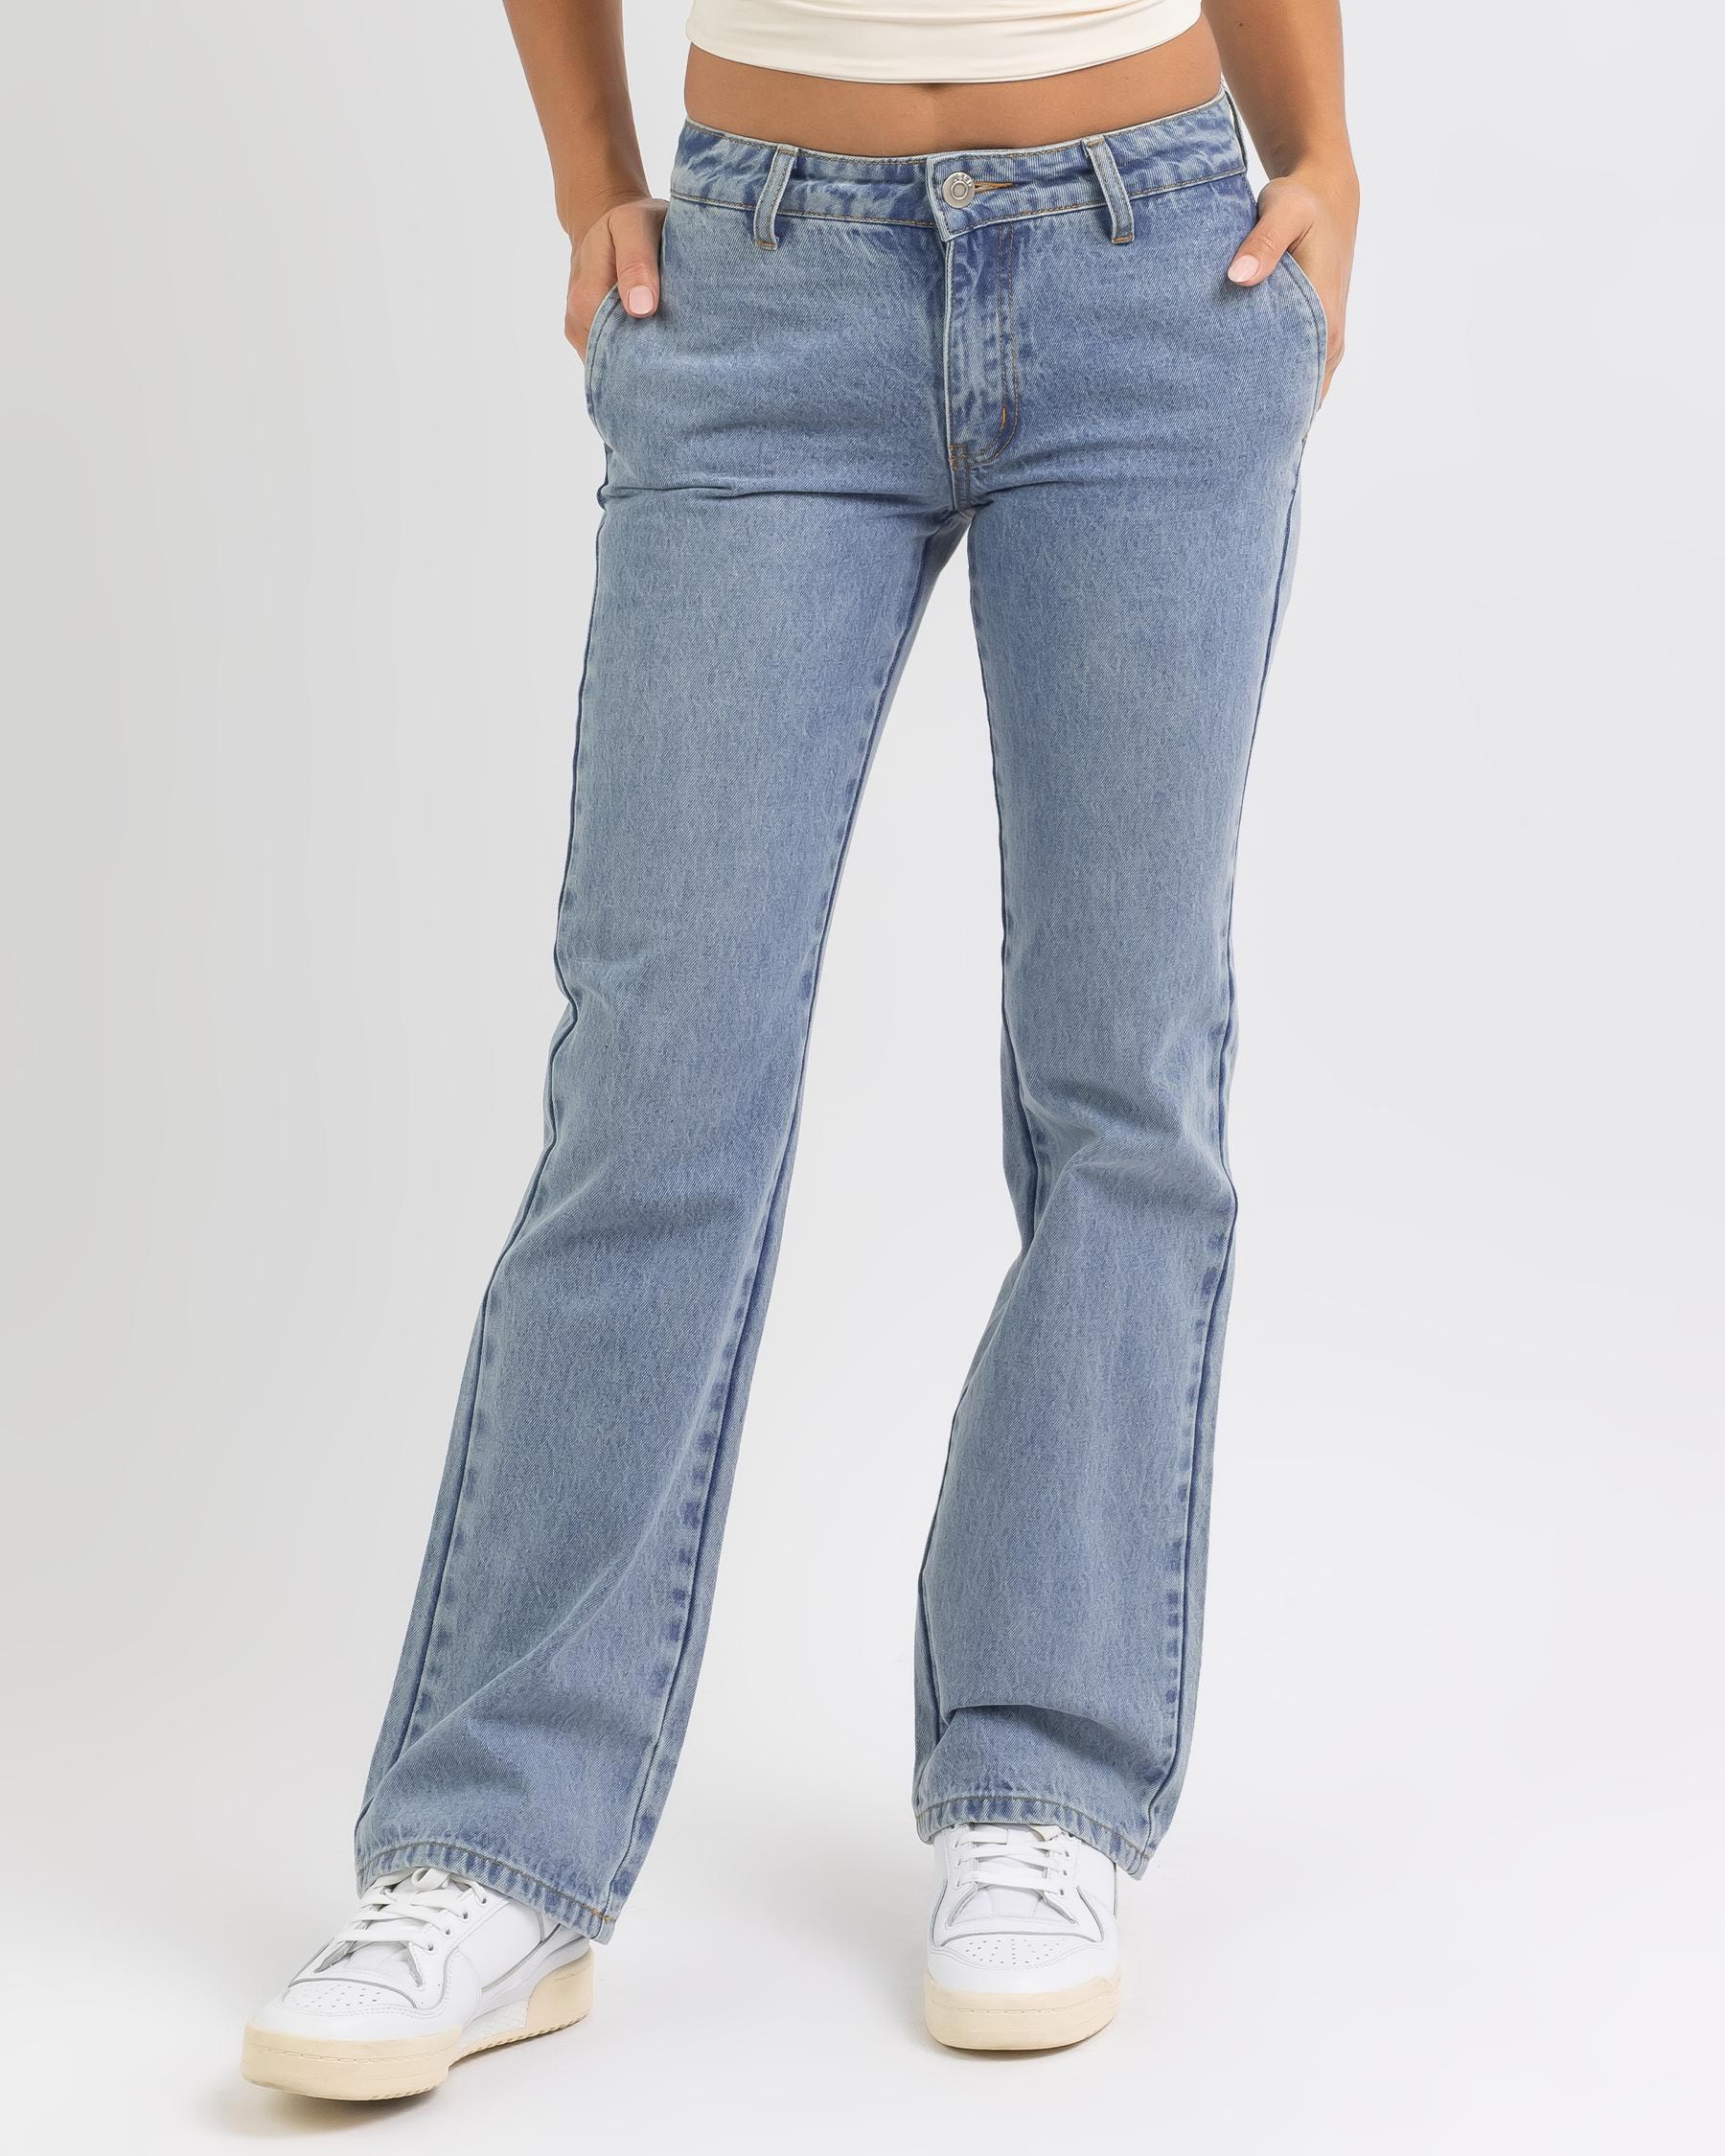 Used Low Rider Jeans In Light Mid Blue - FREE* Shipping & Easy Returns ...